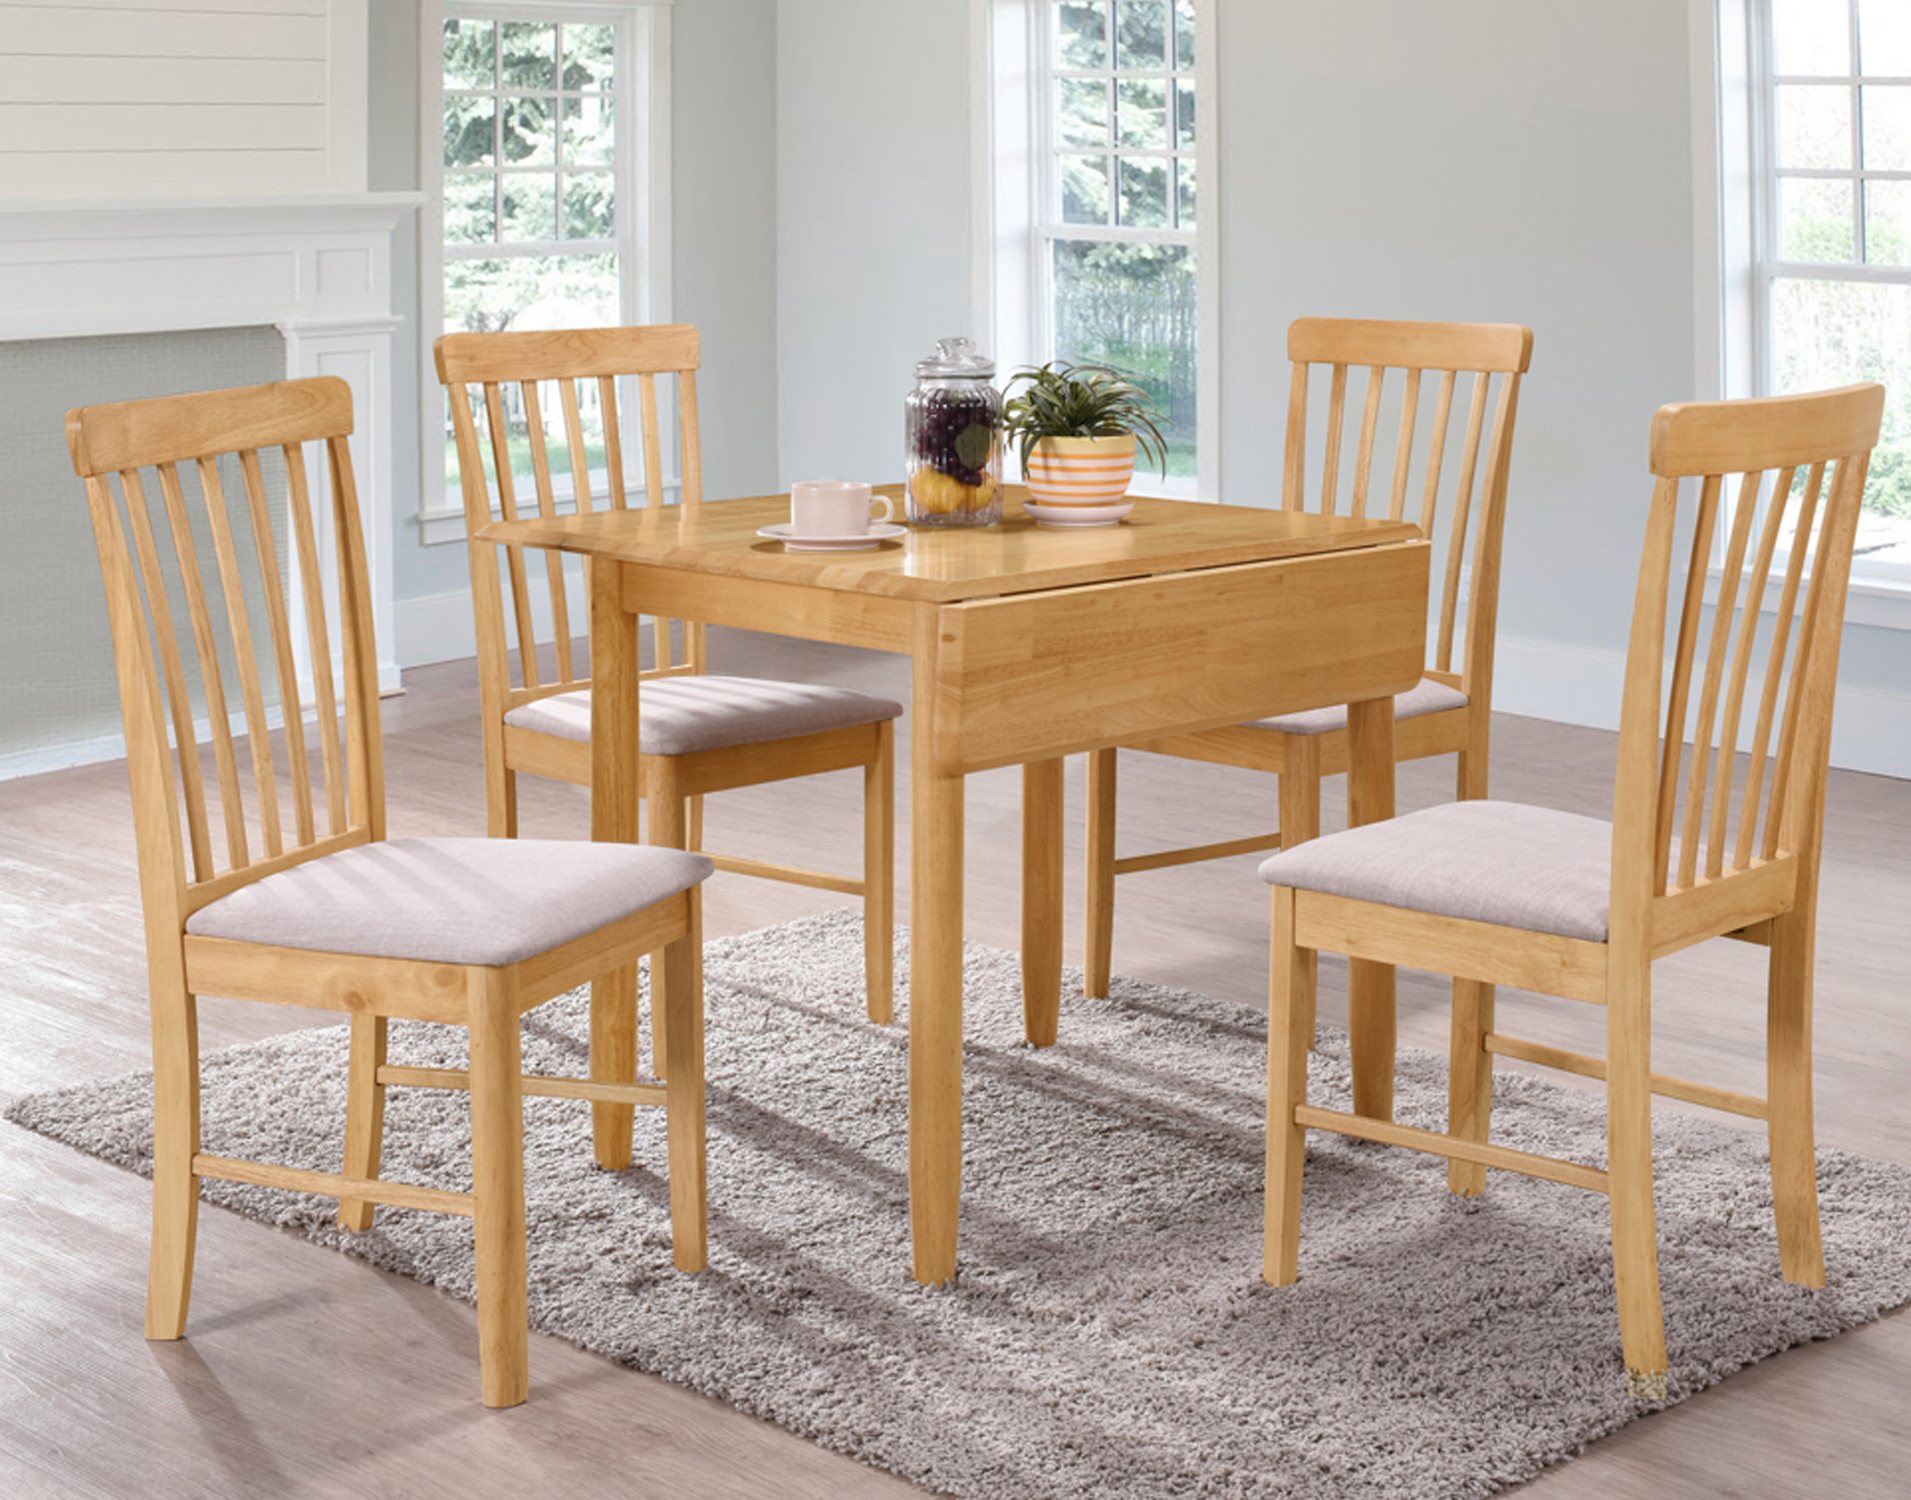 30 kitchen table and chair